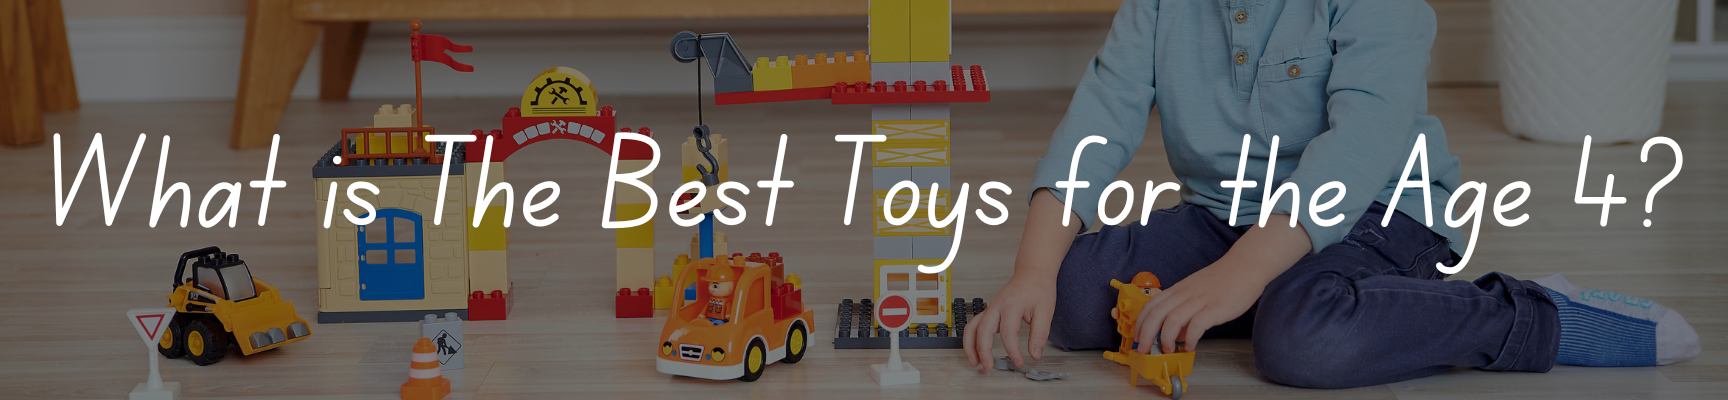 What is The Best Toys Age 4